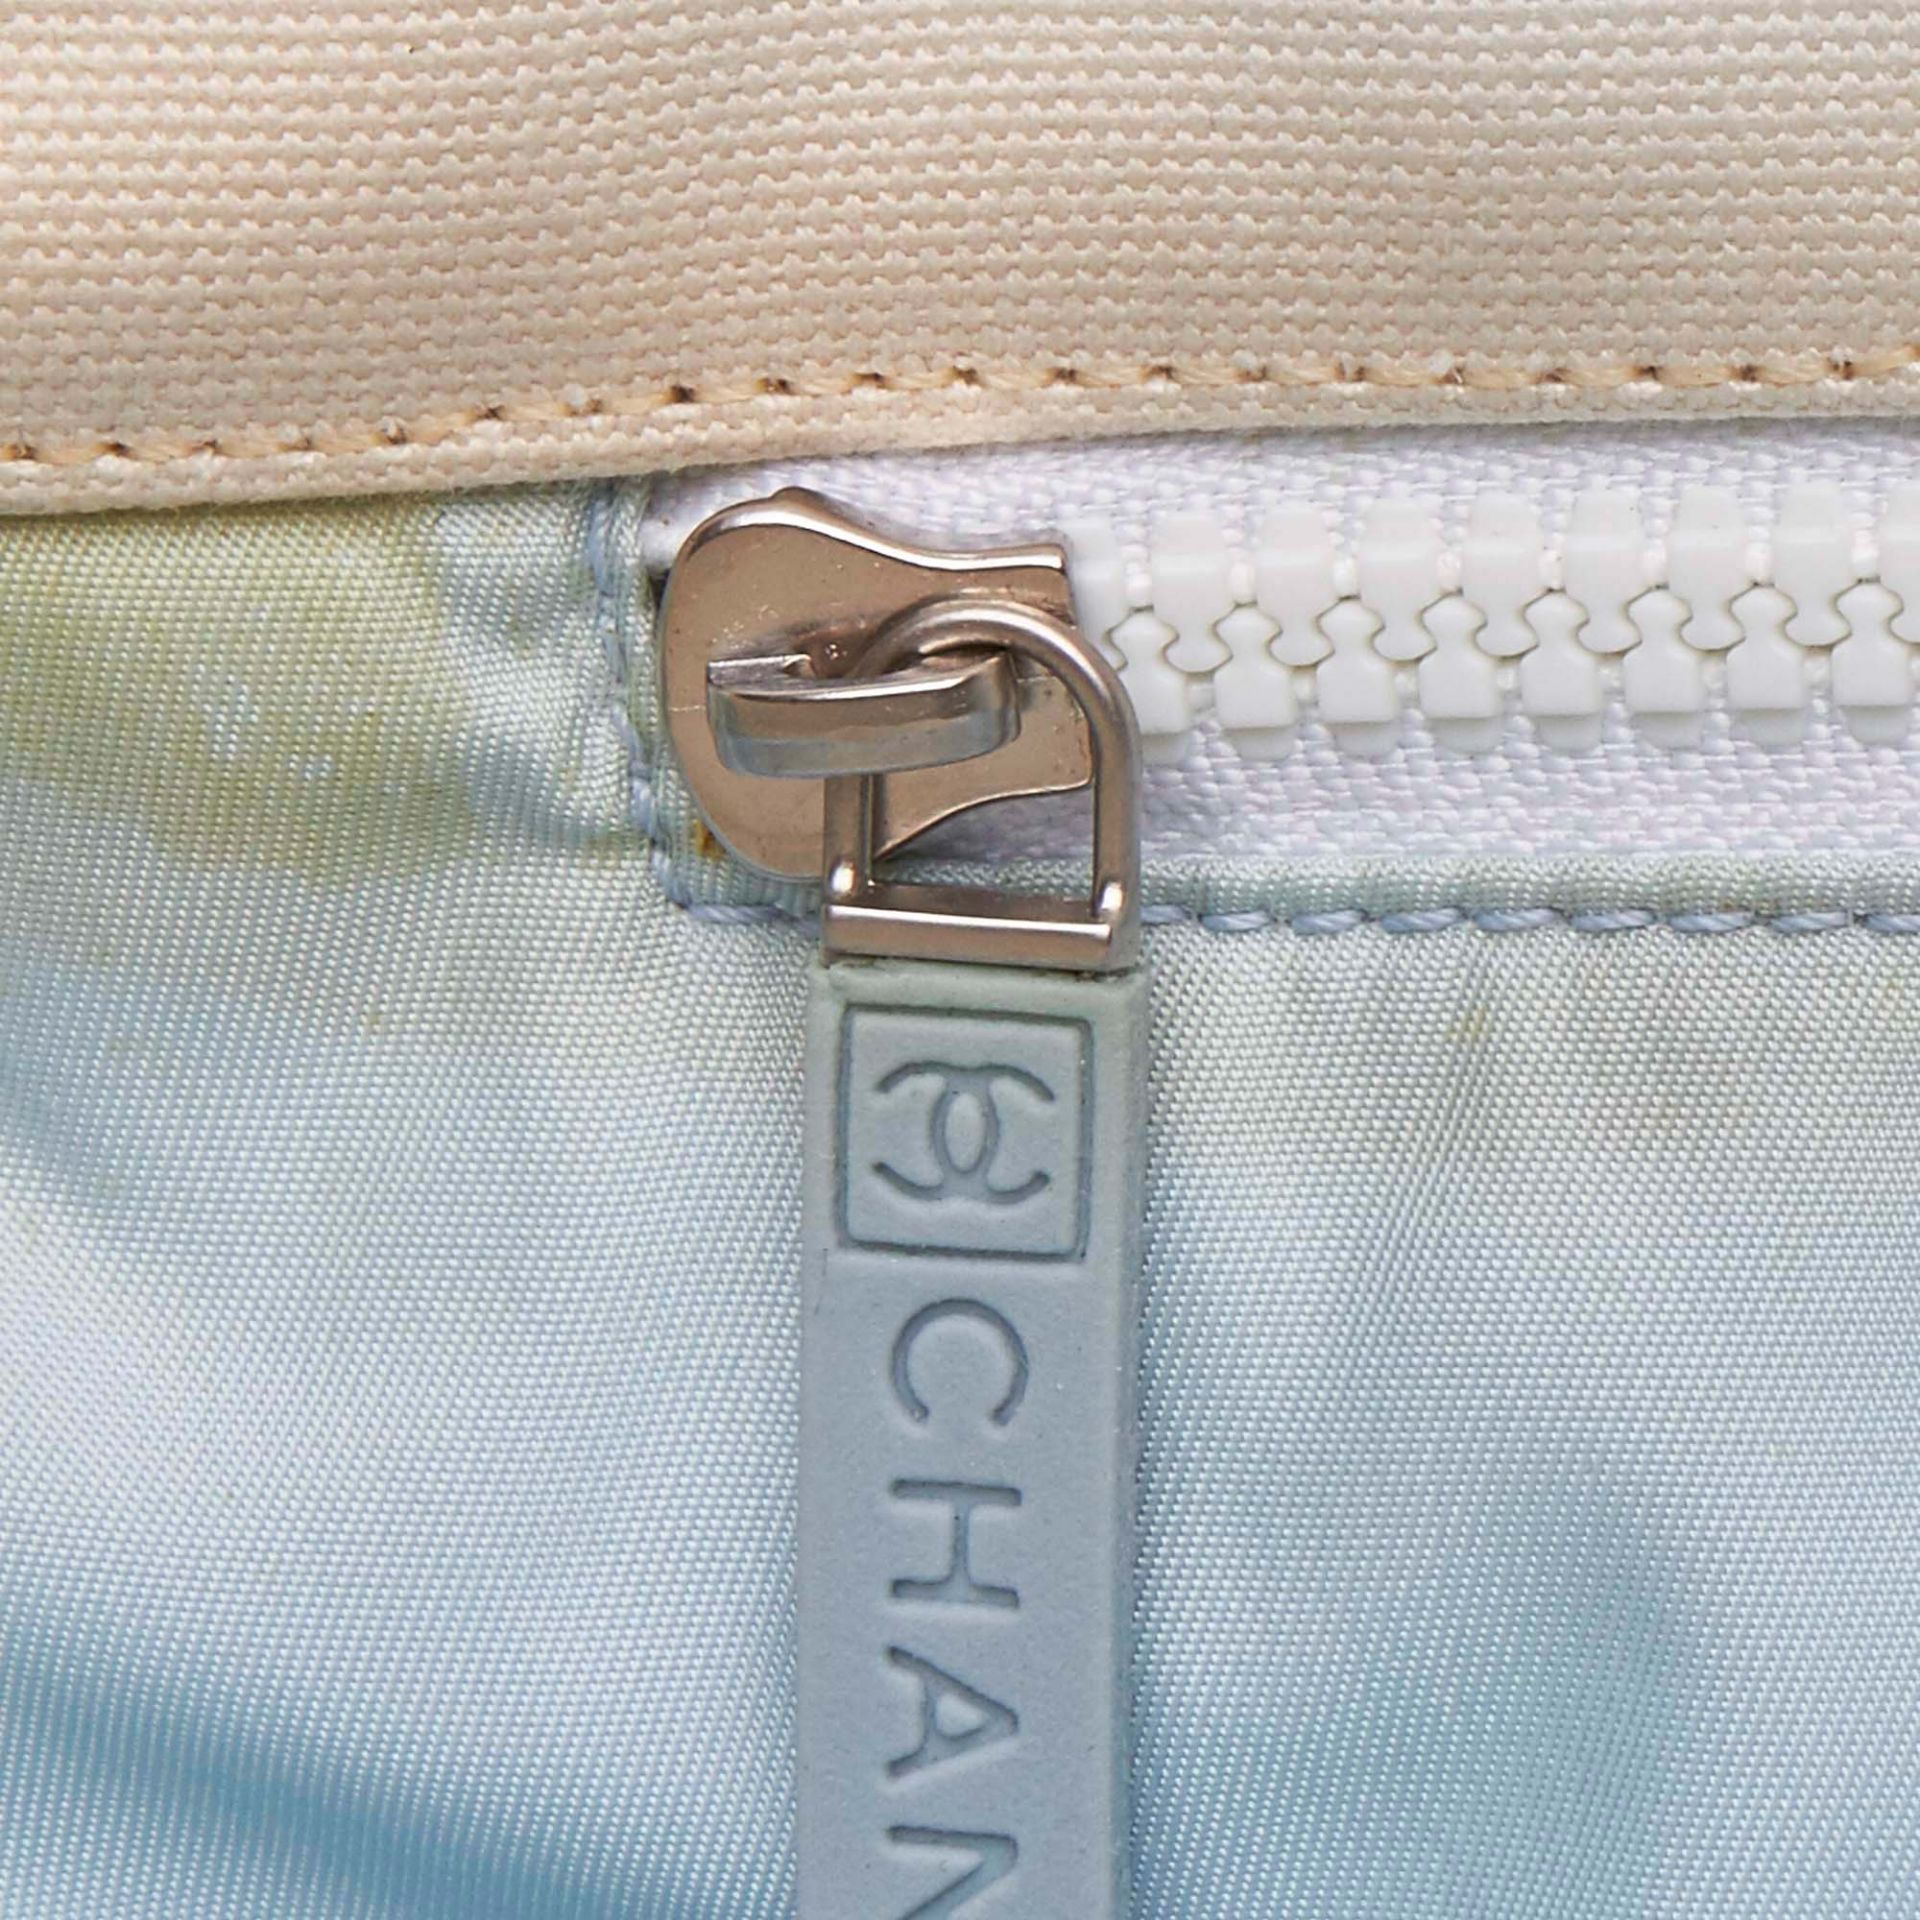 Chanel Tricolor Sports Line Canvas Tote Bag - Image 6 of 10